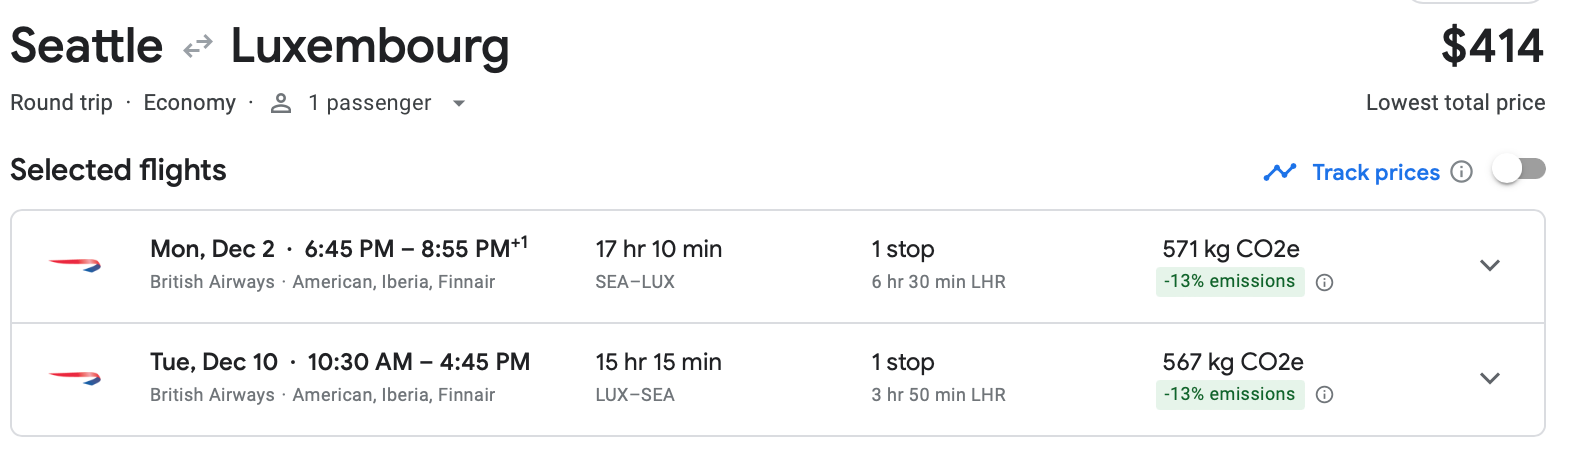 Google Flights estimate for roundtrip flight from Seattle to Luxembourg